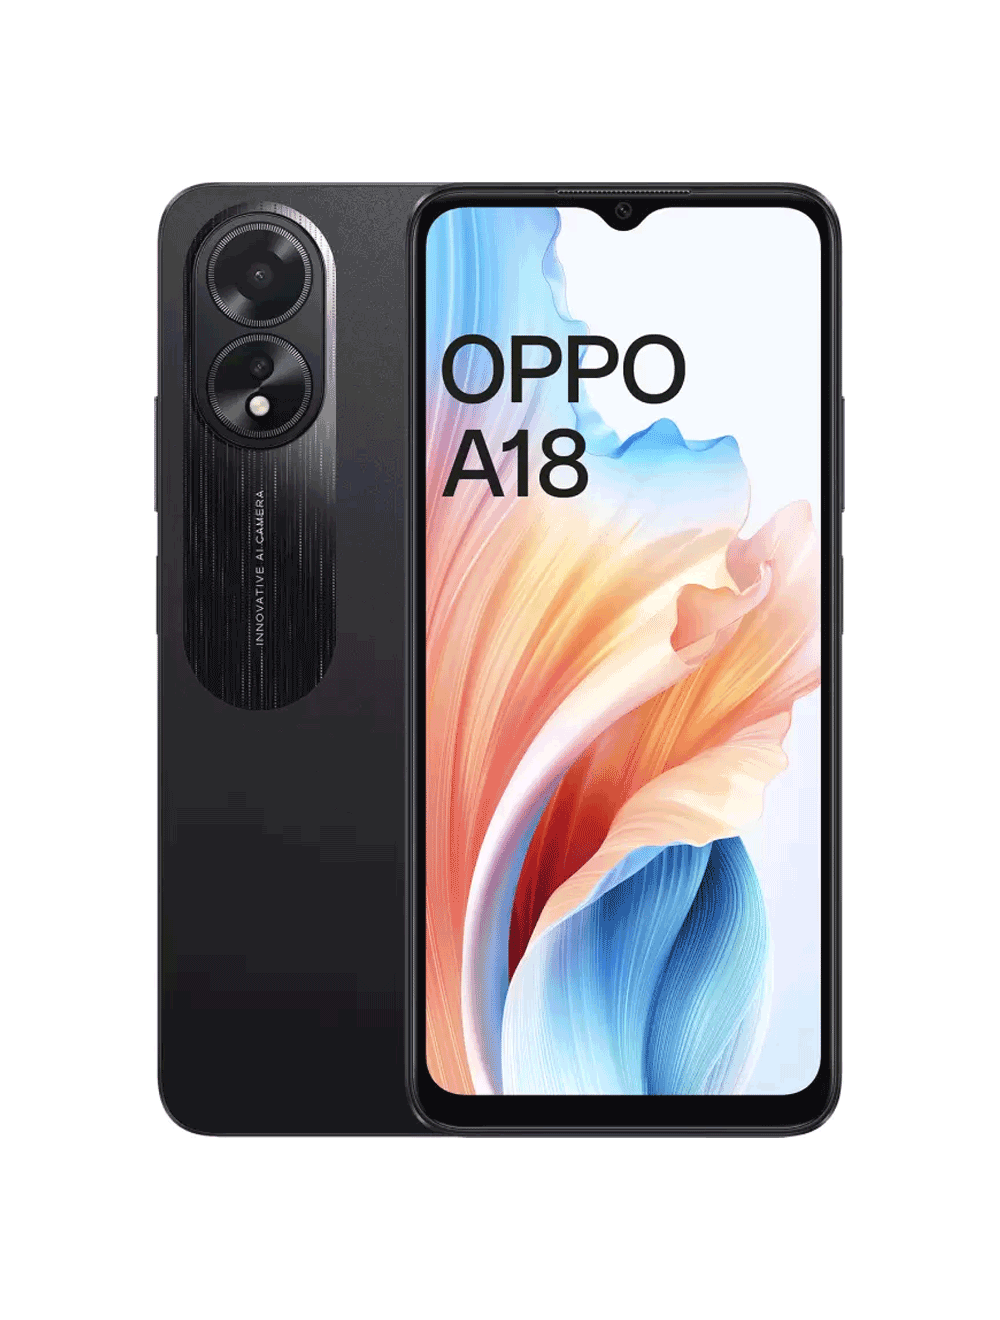 (Unlocked) OPPO A98 5G 8GB+256GB GLOBAL Ver. Android Dual SIM Mobile Phone  BLACK